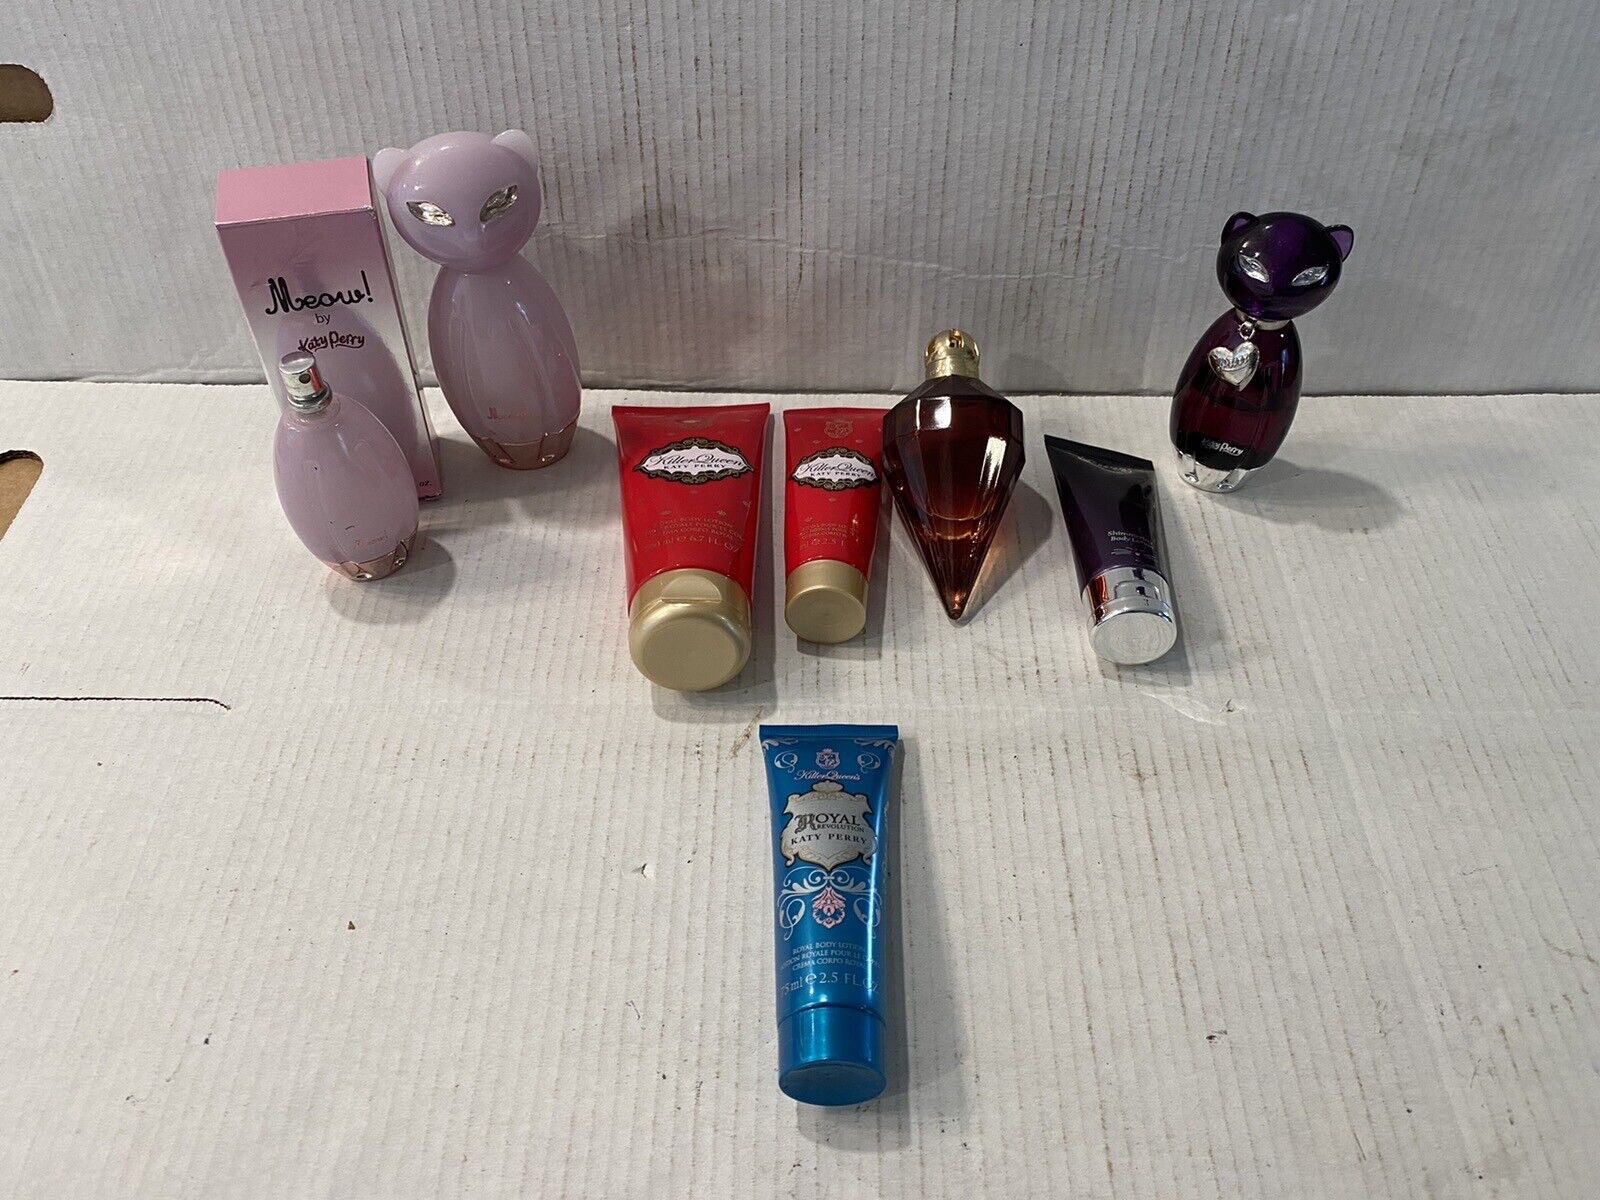 Katy Perry Empty Perfume Bottle Lot ( 4 Types: Killer Queen, Purr, Meow, Royal)